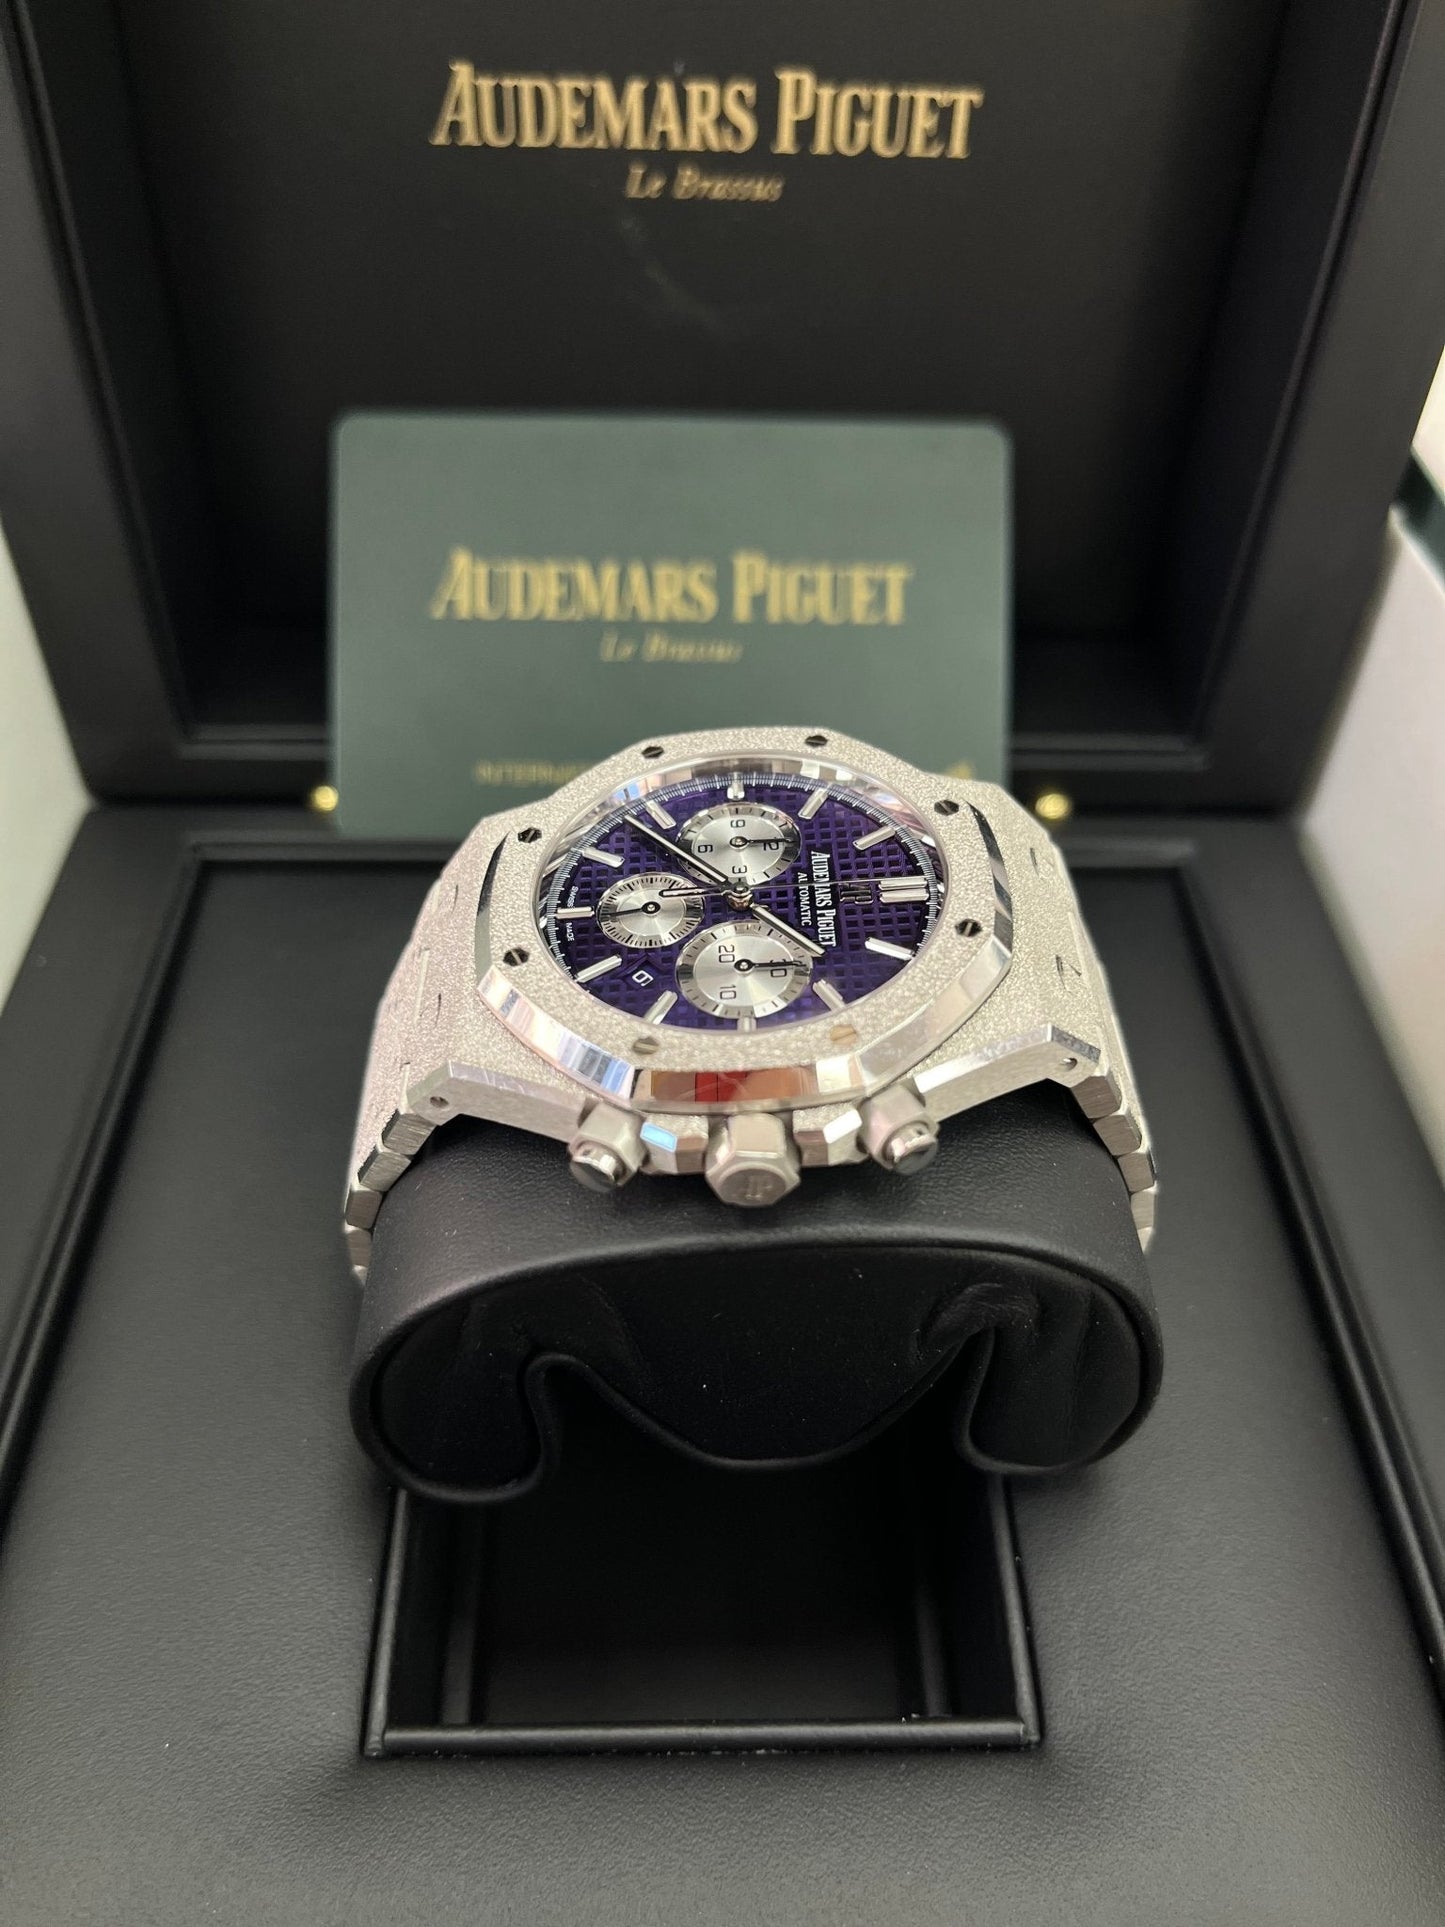 Audemars Piguet Royal Oak Selfwinding Chronograph Frosted White Gold Purple Dial LIMITED EDITION